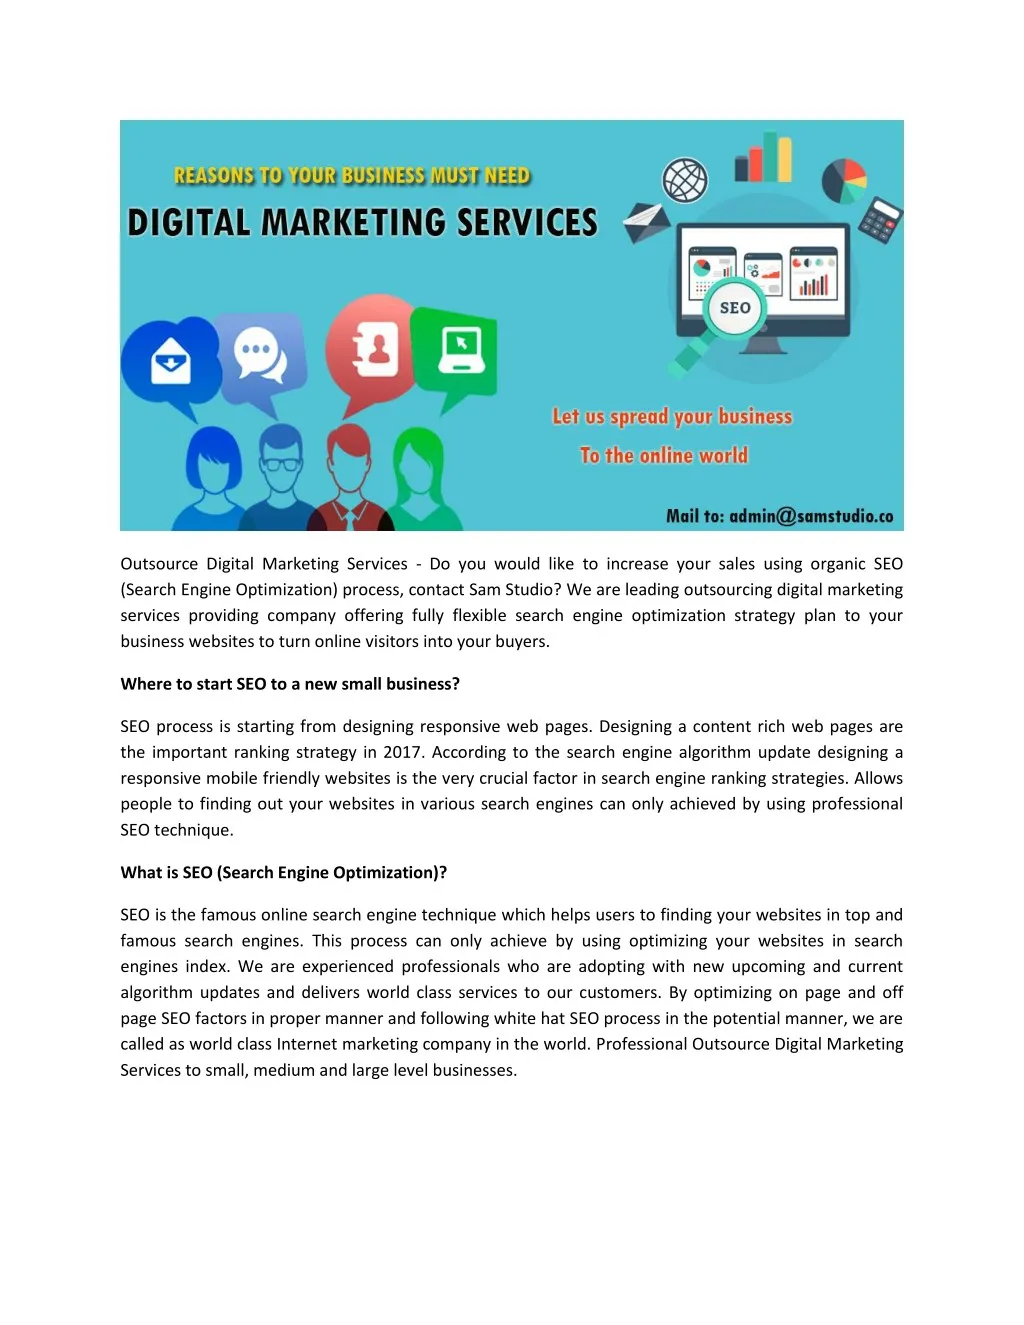 outsource digital marketing services do you would